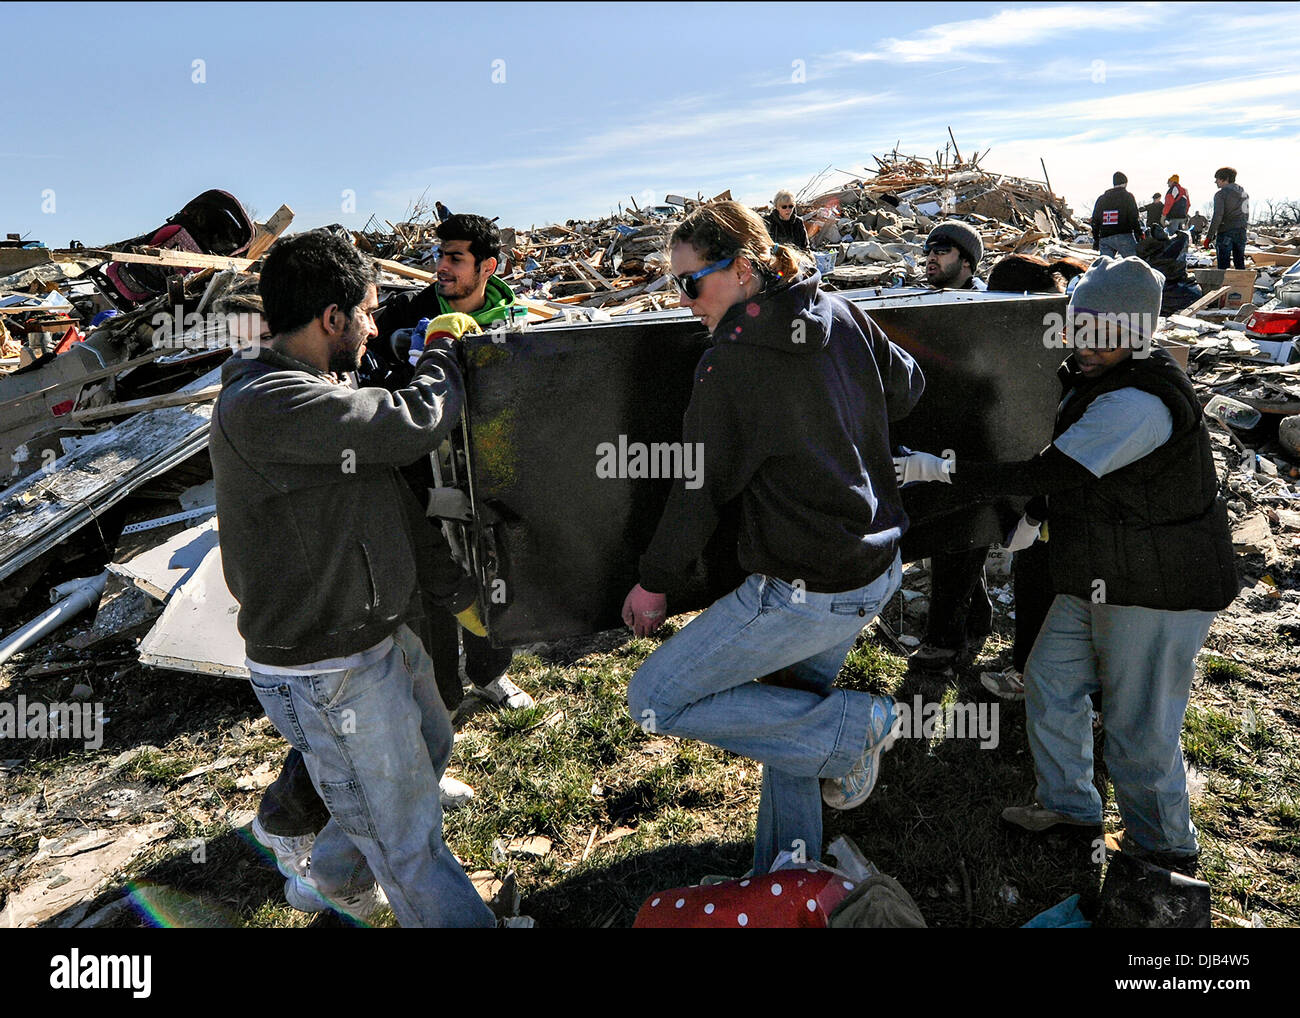 Residents recover items from their homes destroyed by an EF-4 tornado November 19, 2013 in Washington, IL. The tornado left a path of destruction that stretched for more than 46 miles and damaged fourteen-hundred homes. Stock Photo